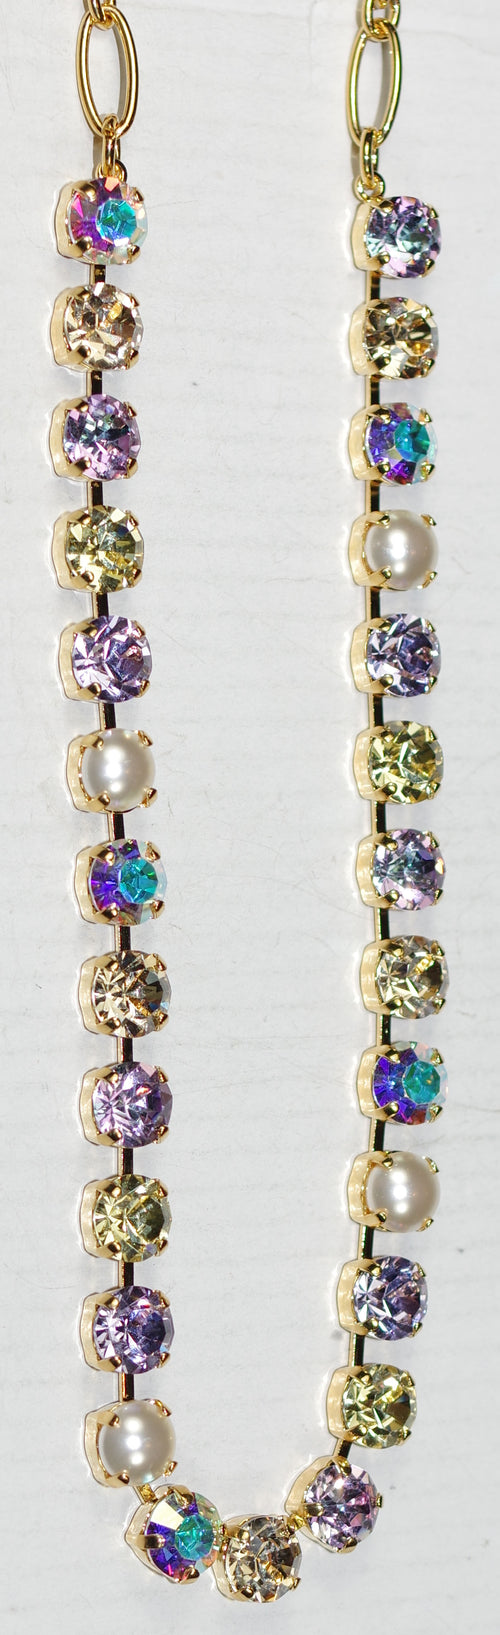 MARIANA NECKLACE BETTE DAWN: purple, pearl, yellow, a/b 1/4" stones in yellow gold setting, 17" adjustable chain